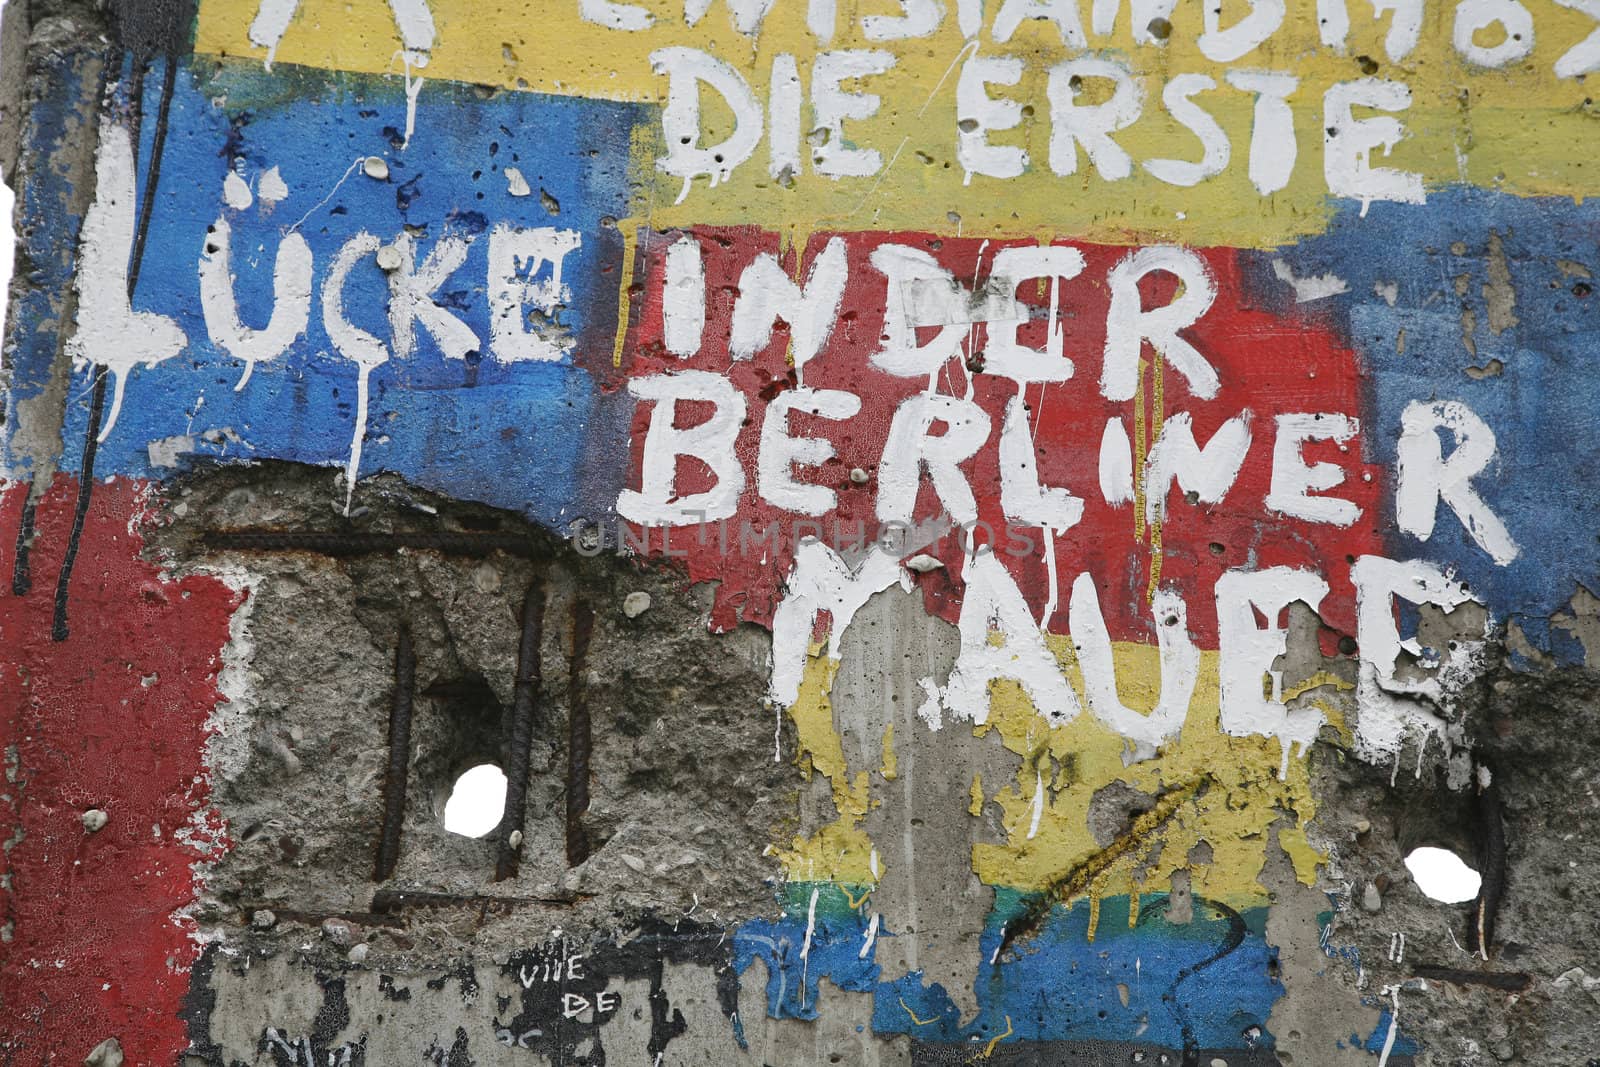 Graffiti and greetings on one of the remaining sections of the old cold war Berlin wall - Germany. The German text says:" The first holes in the Berlin Wall."